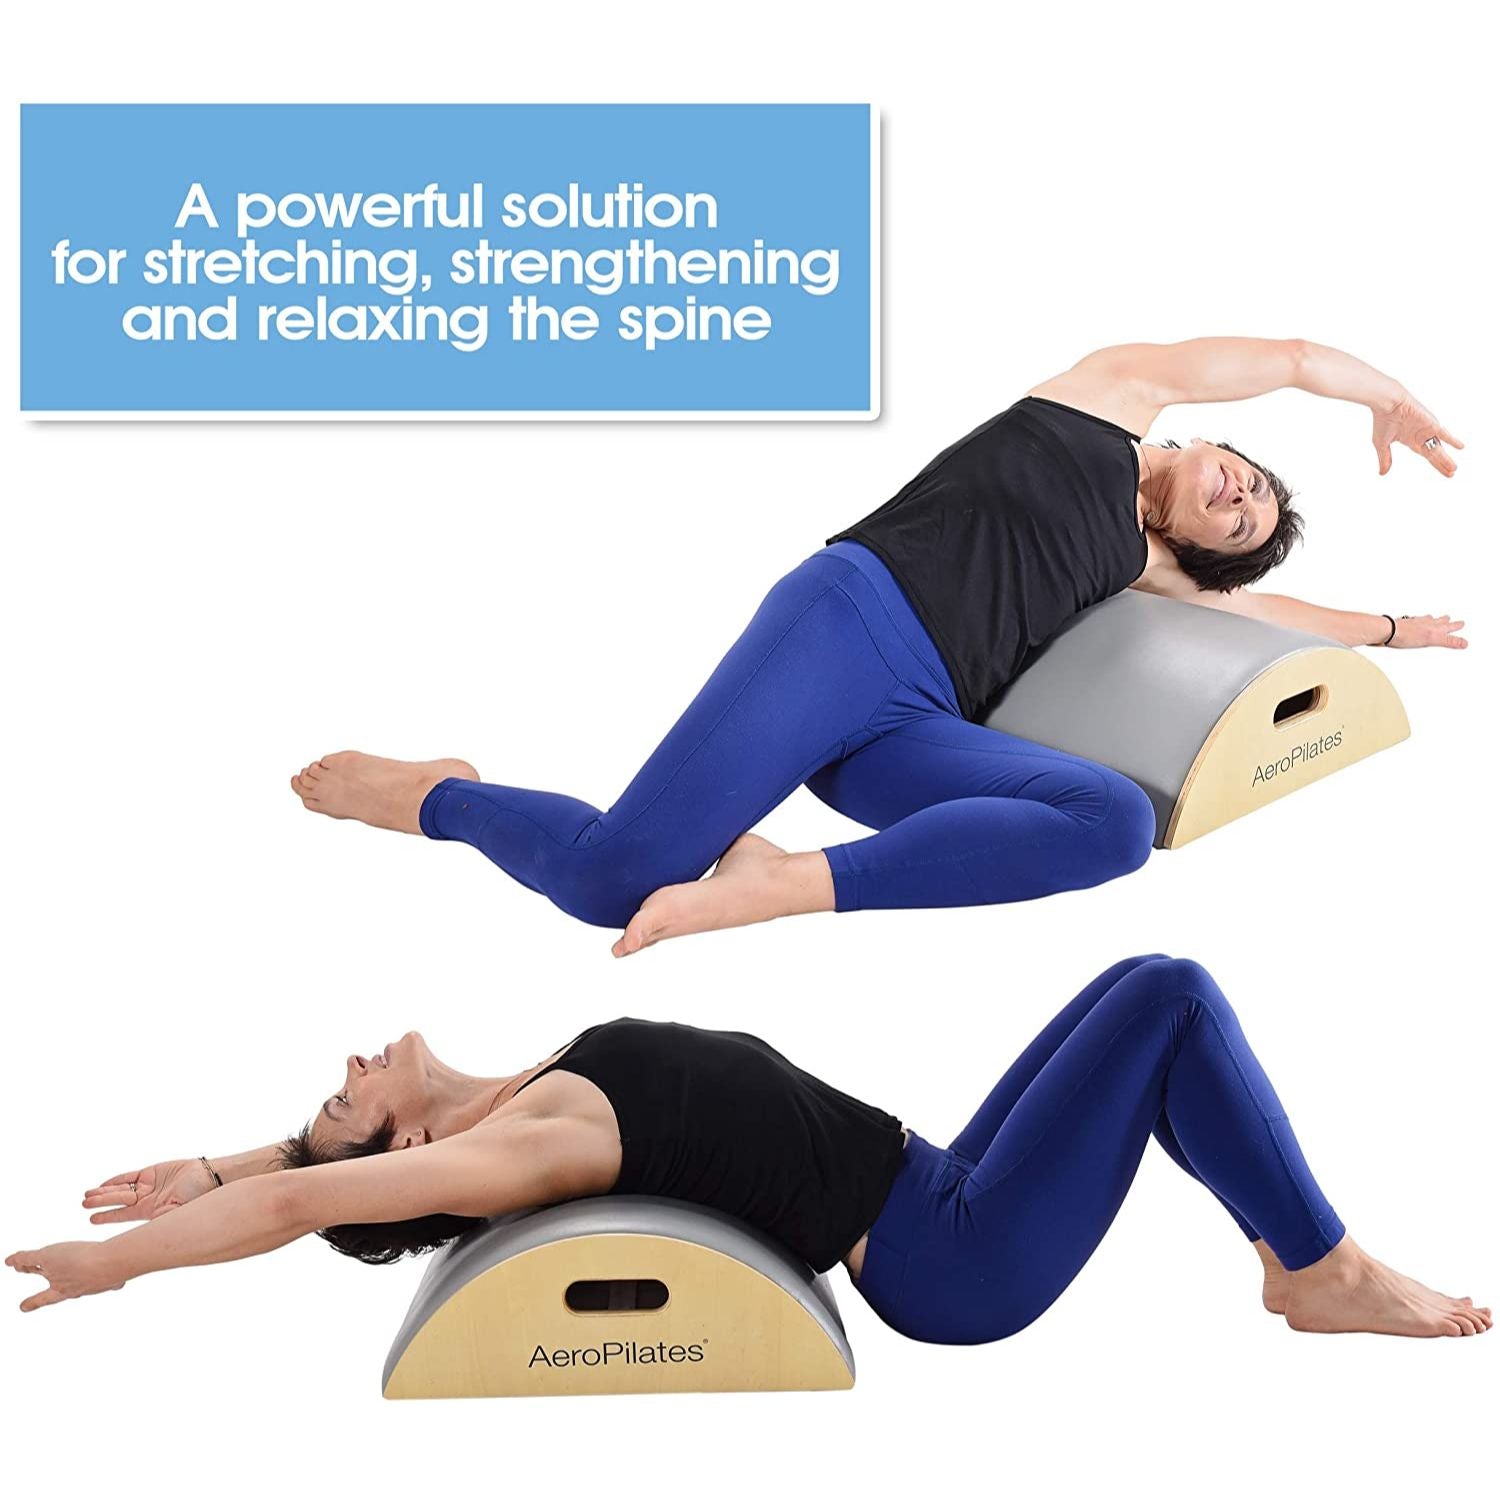 Our Pilates Arc, what it is & which one is best - Gone Adventuring